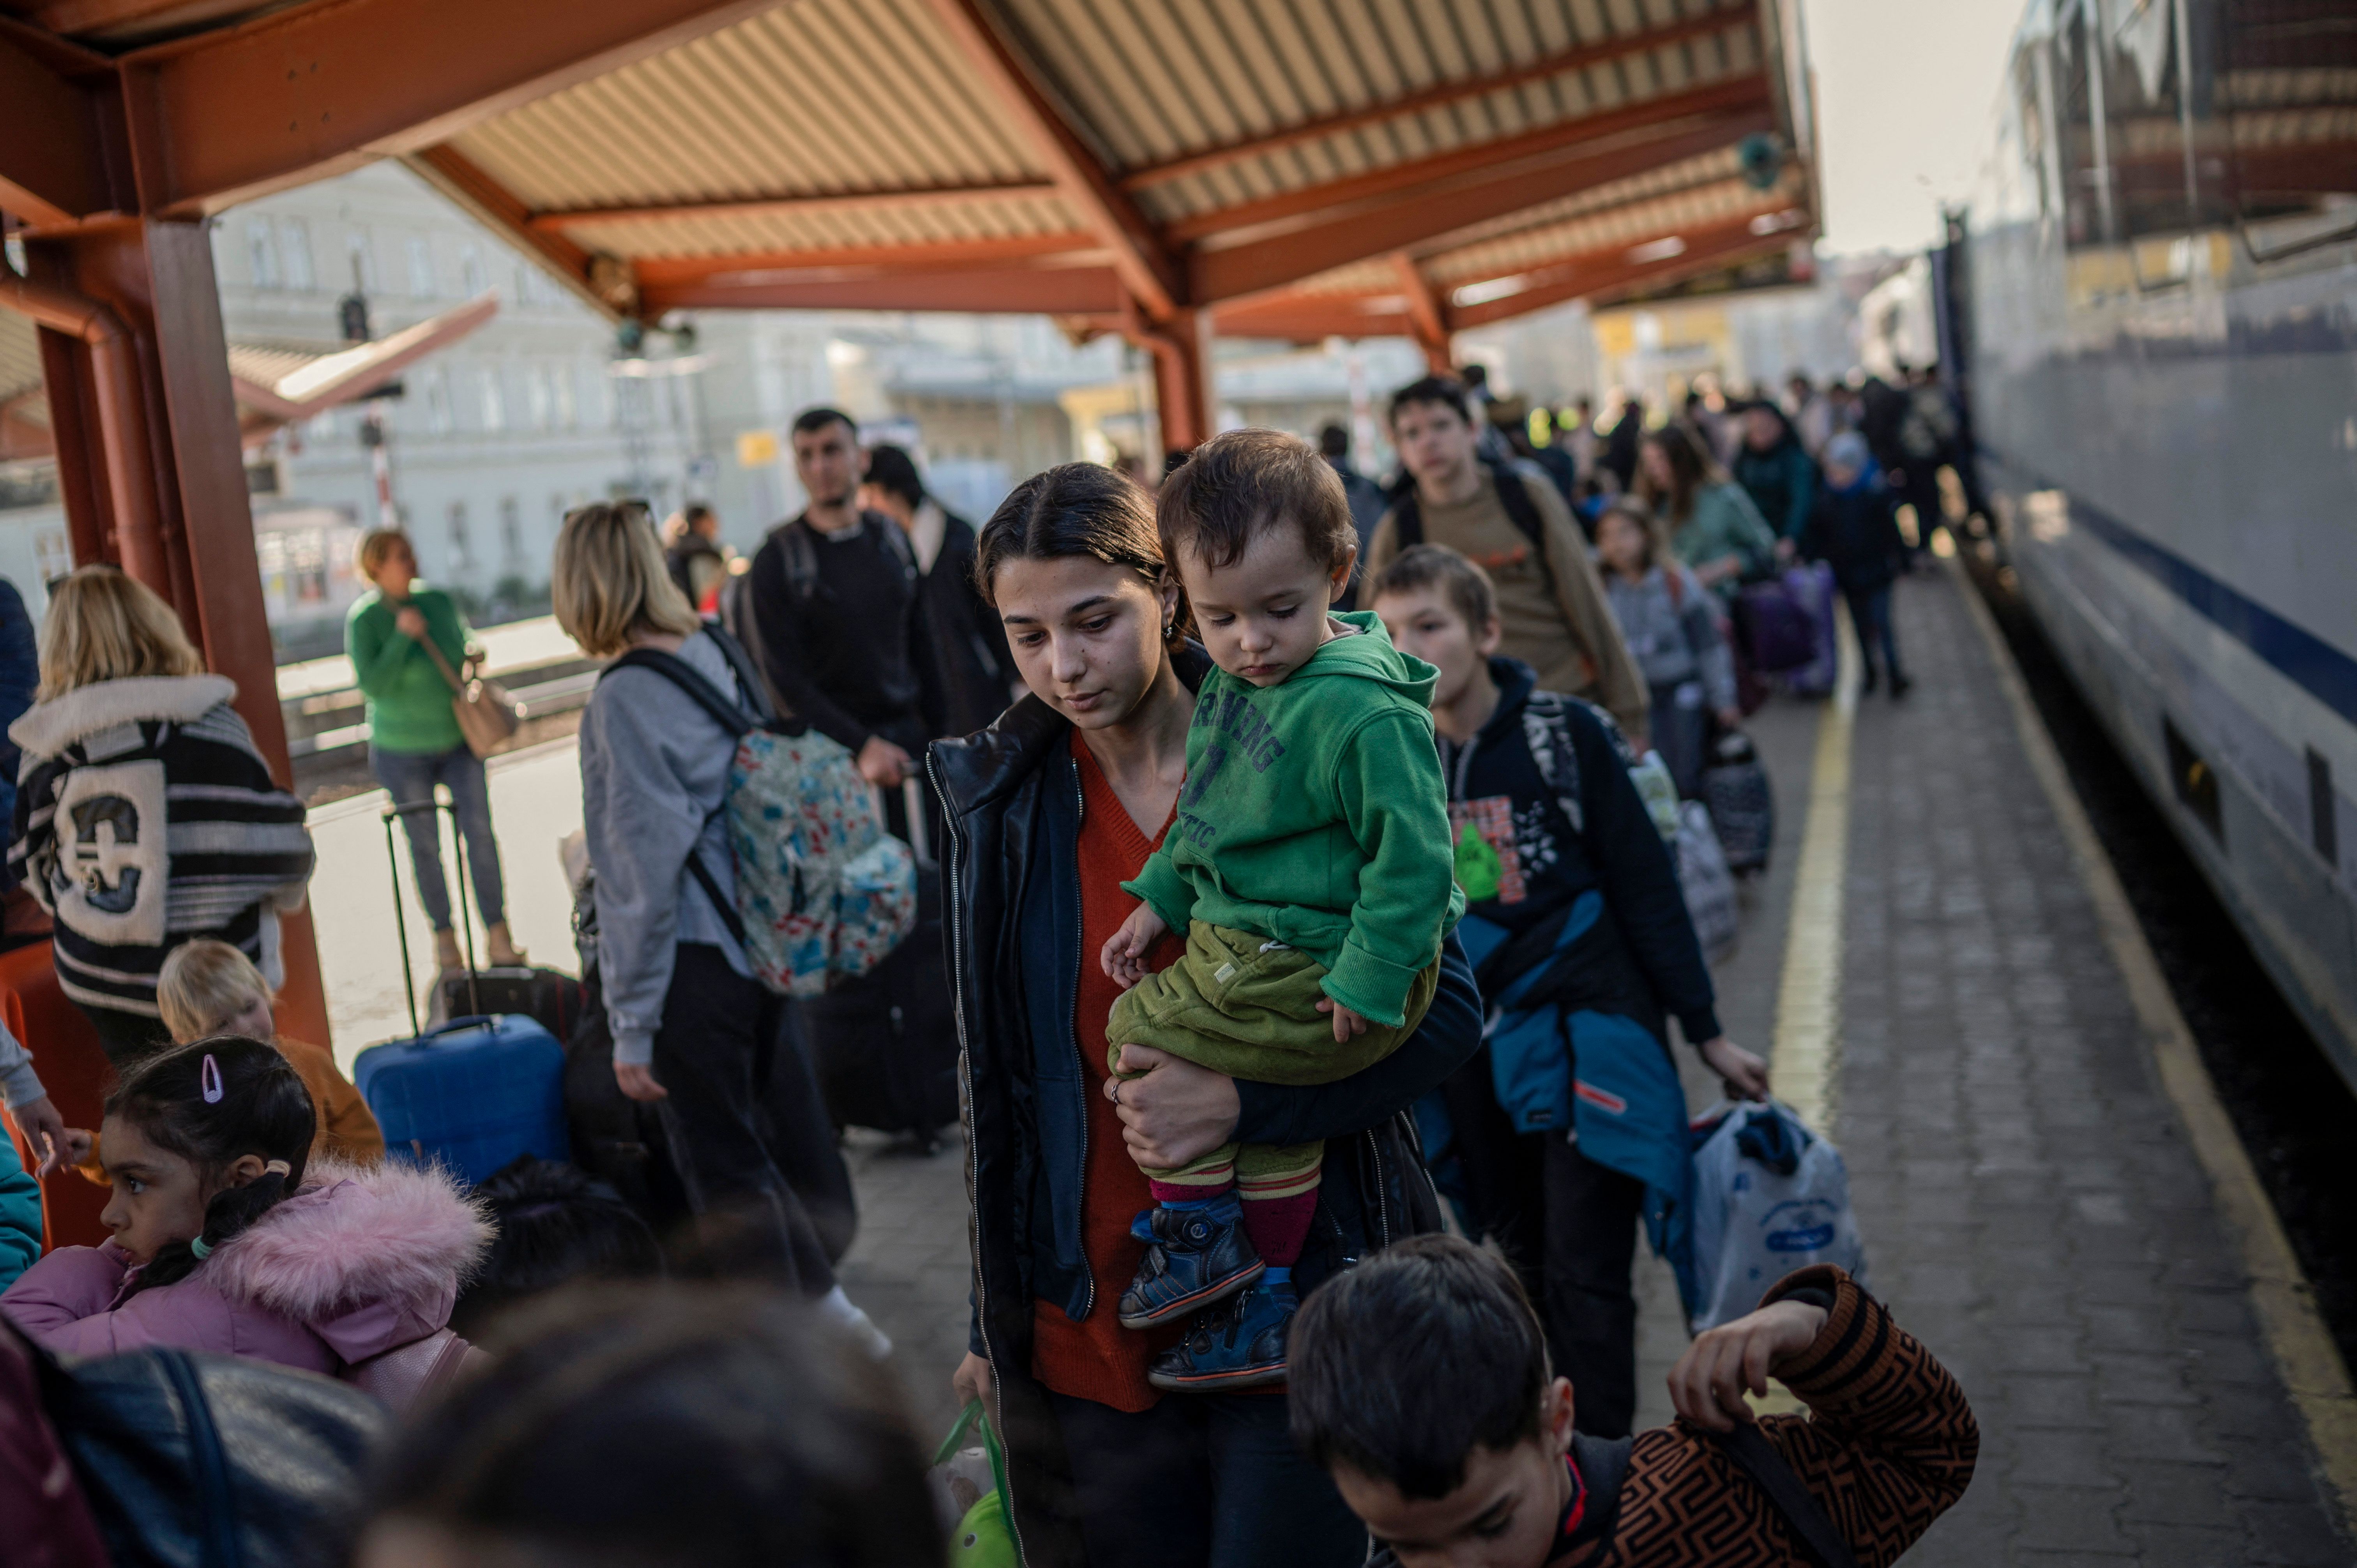 Ukrainian evacuees board a train to Warsaw at the rail station in Przemysl, Poland, on March 23.